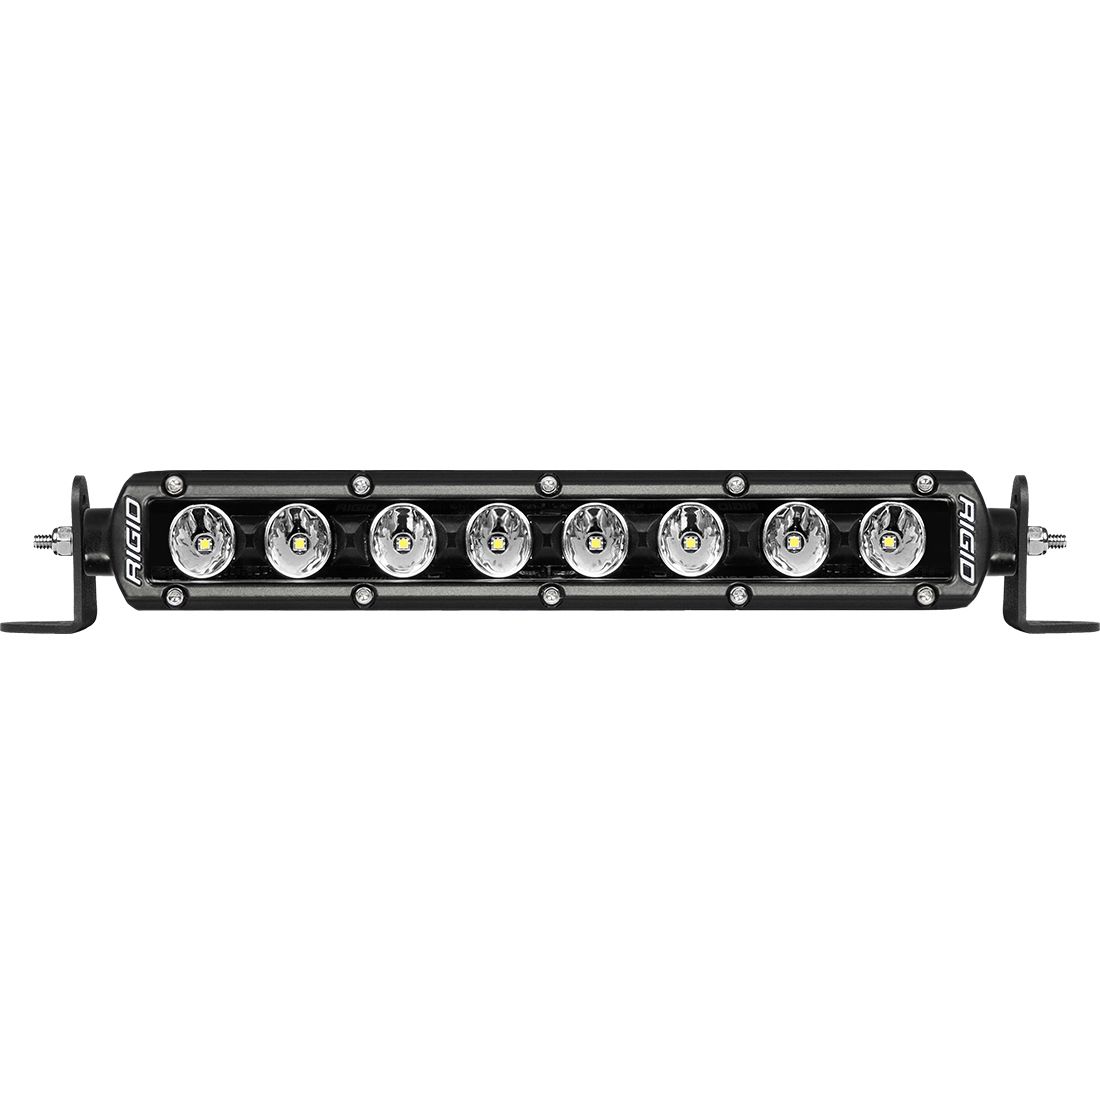 Rigid Industries Radiance Plus SR-Series LED Light 8 Option RGBW Backlight 10 Inch - Click Image to Close